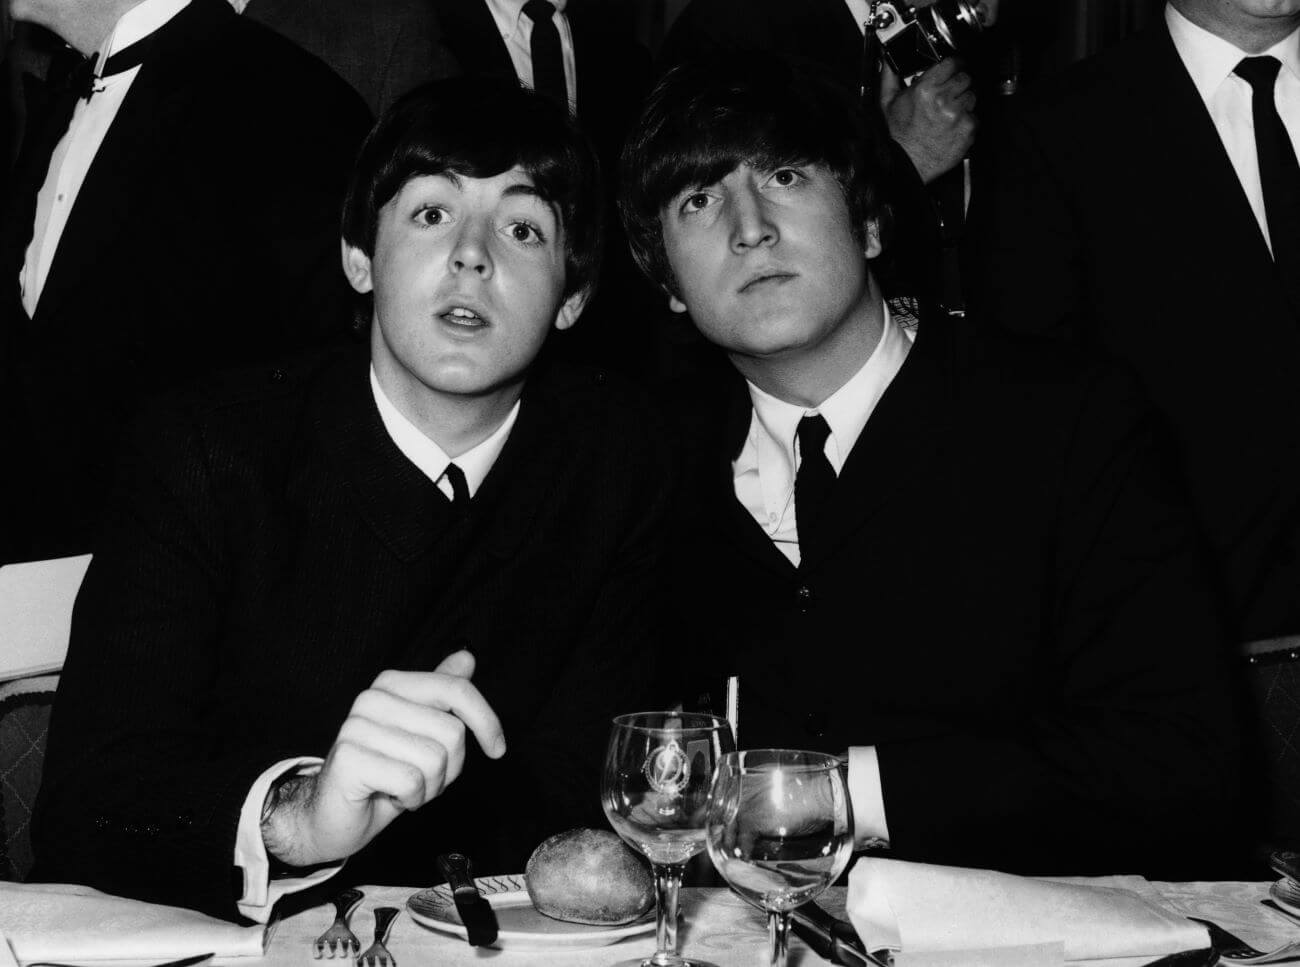 A black and white picture of Paul McCartney and John Lennon wearing suits and sitting at a dinner table. 